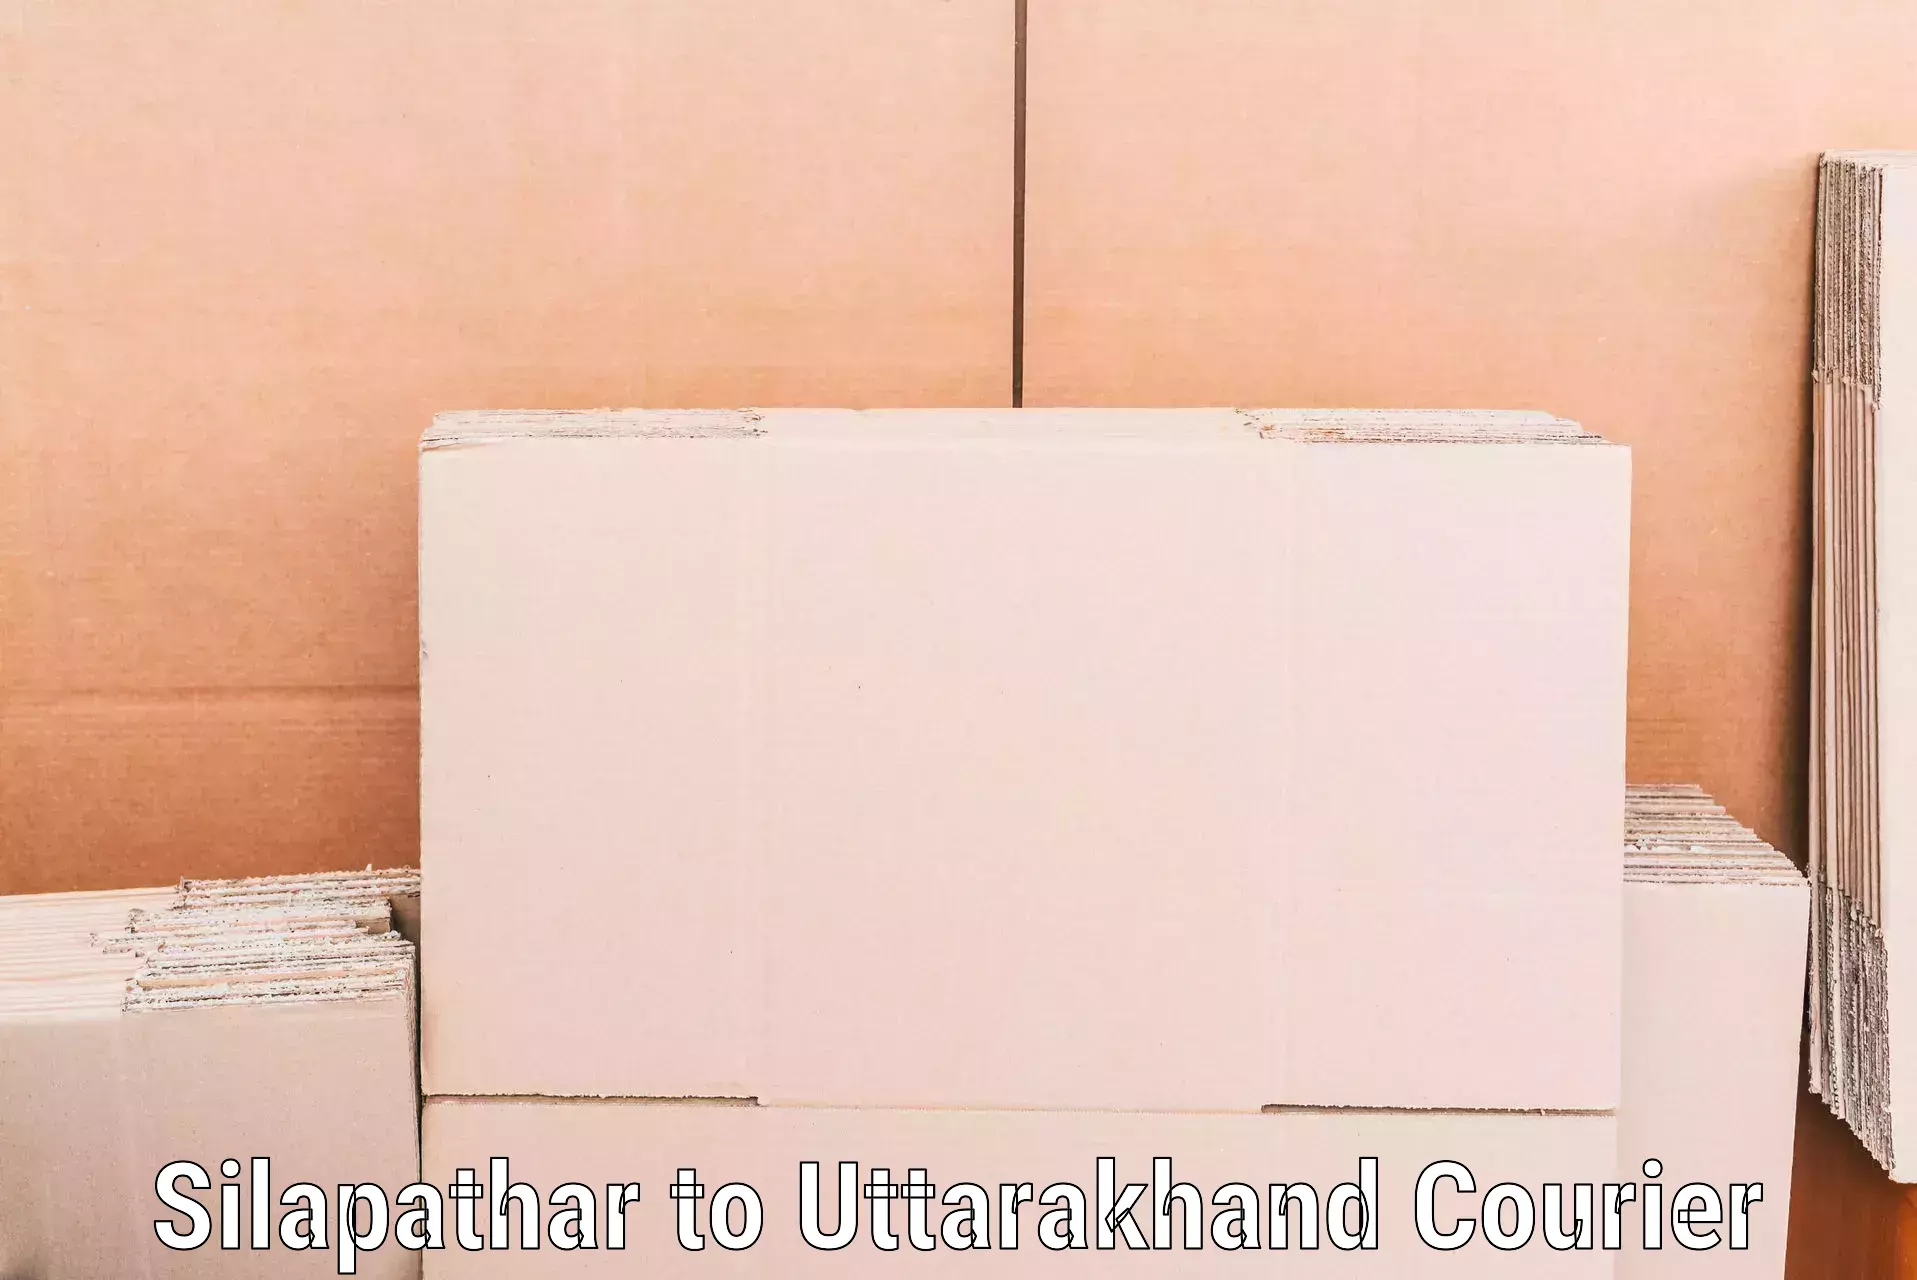 Comprehensive moving services in Silapathar to Almora